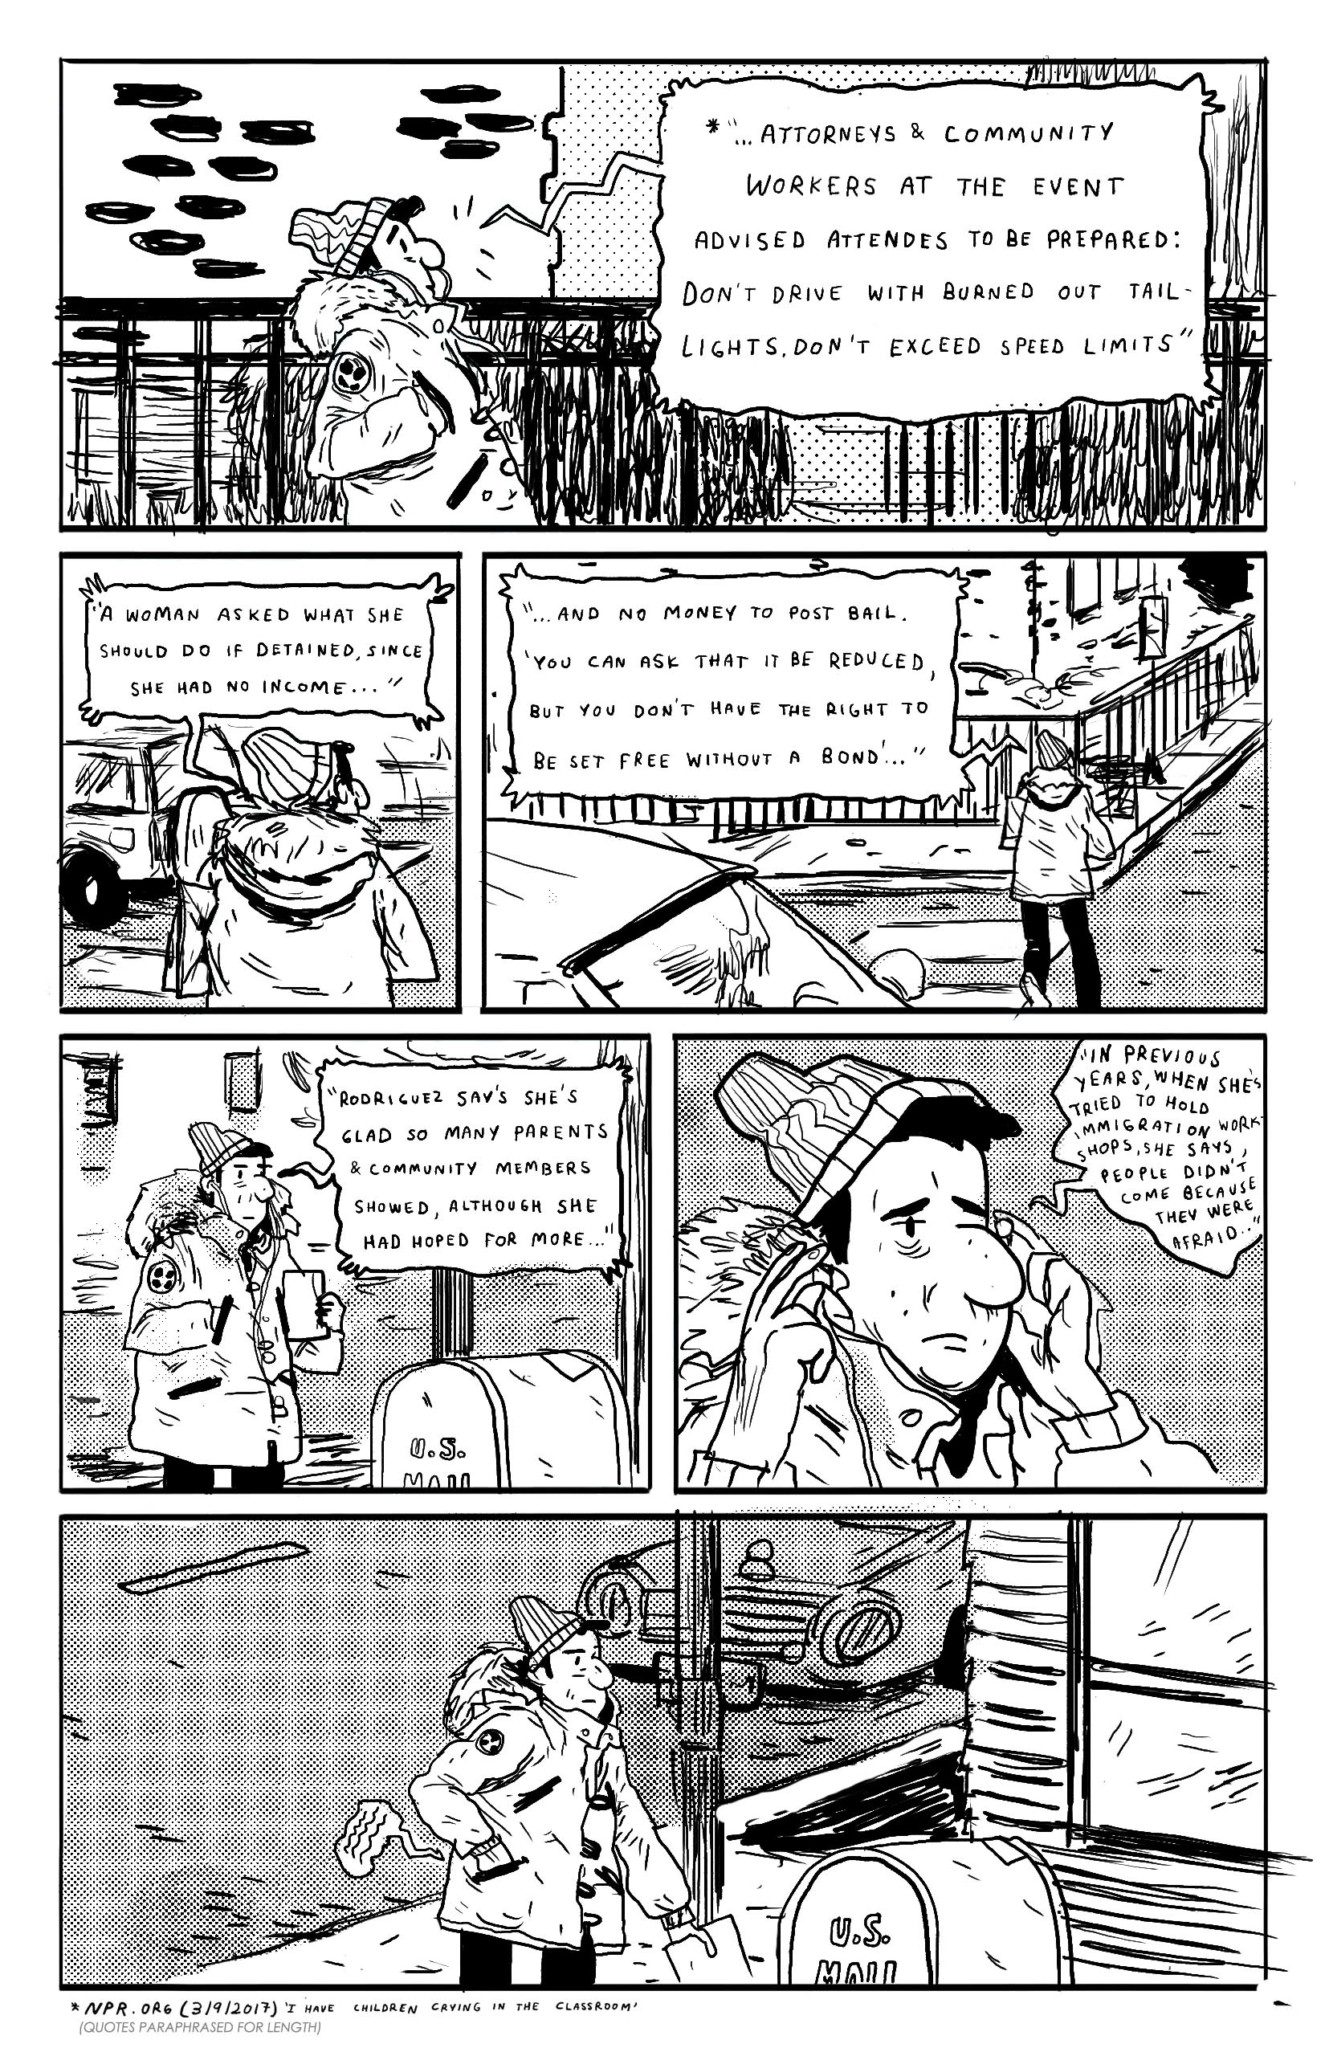 BeingHere_Page4